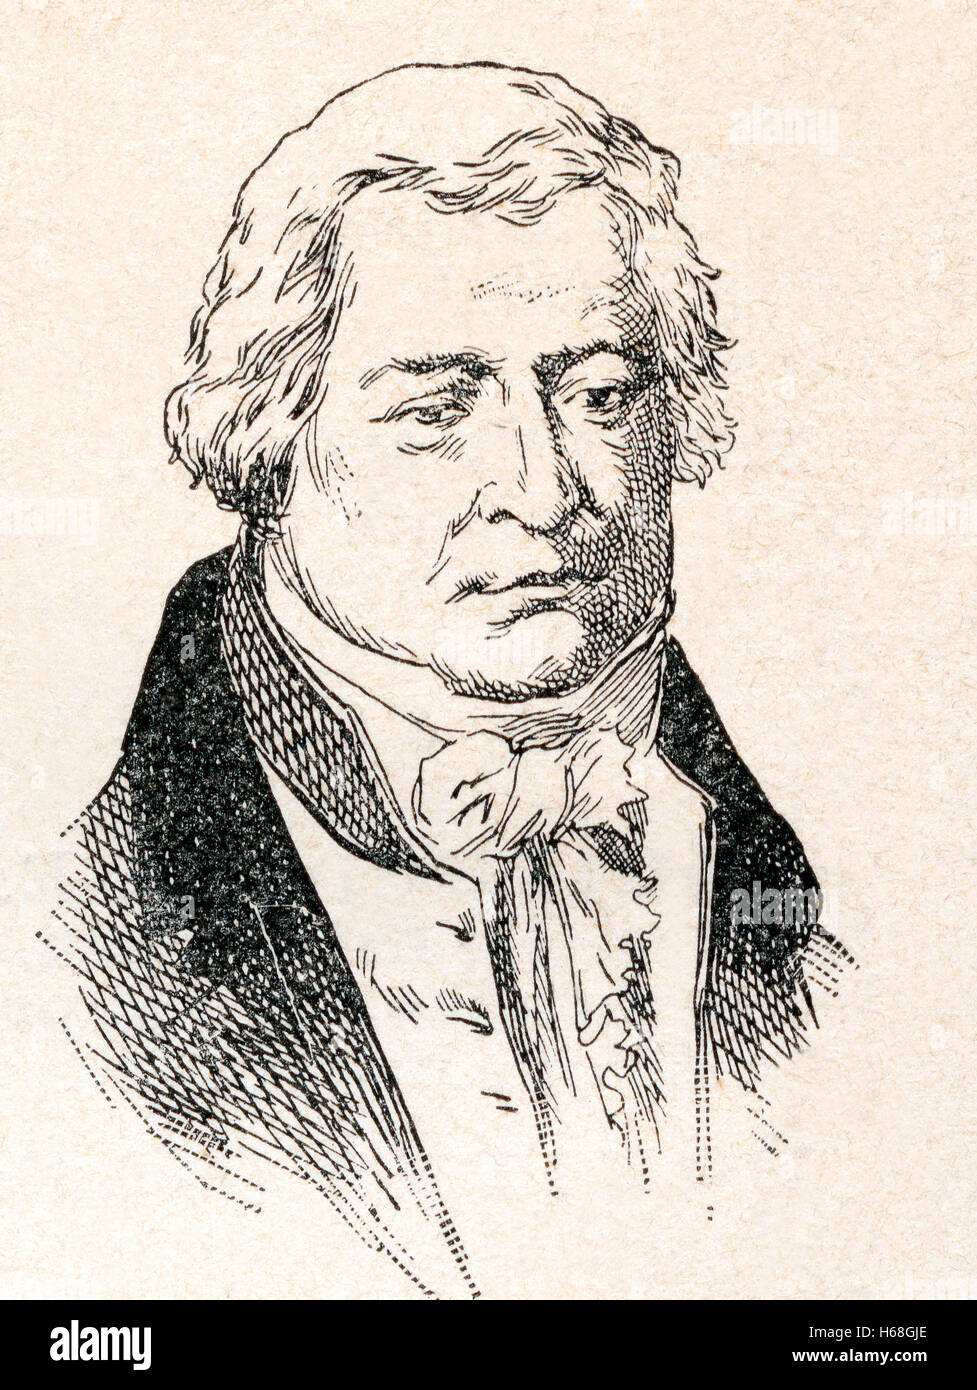 Sébastien Érard, born Sebastian Erhard, 1752 – 1831.  French instrument maker of German origin who specialised in the production of pianos and harps. Stock Photo